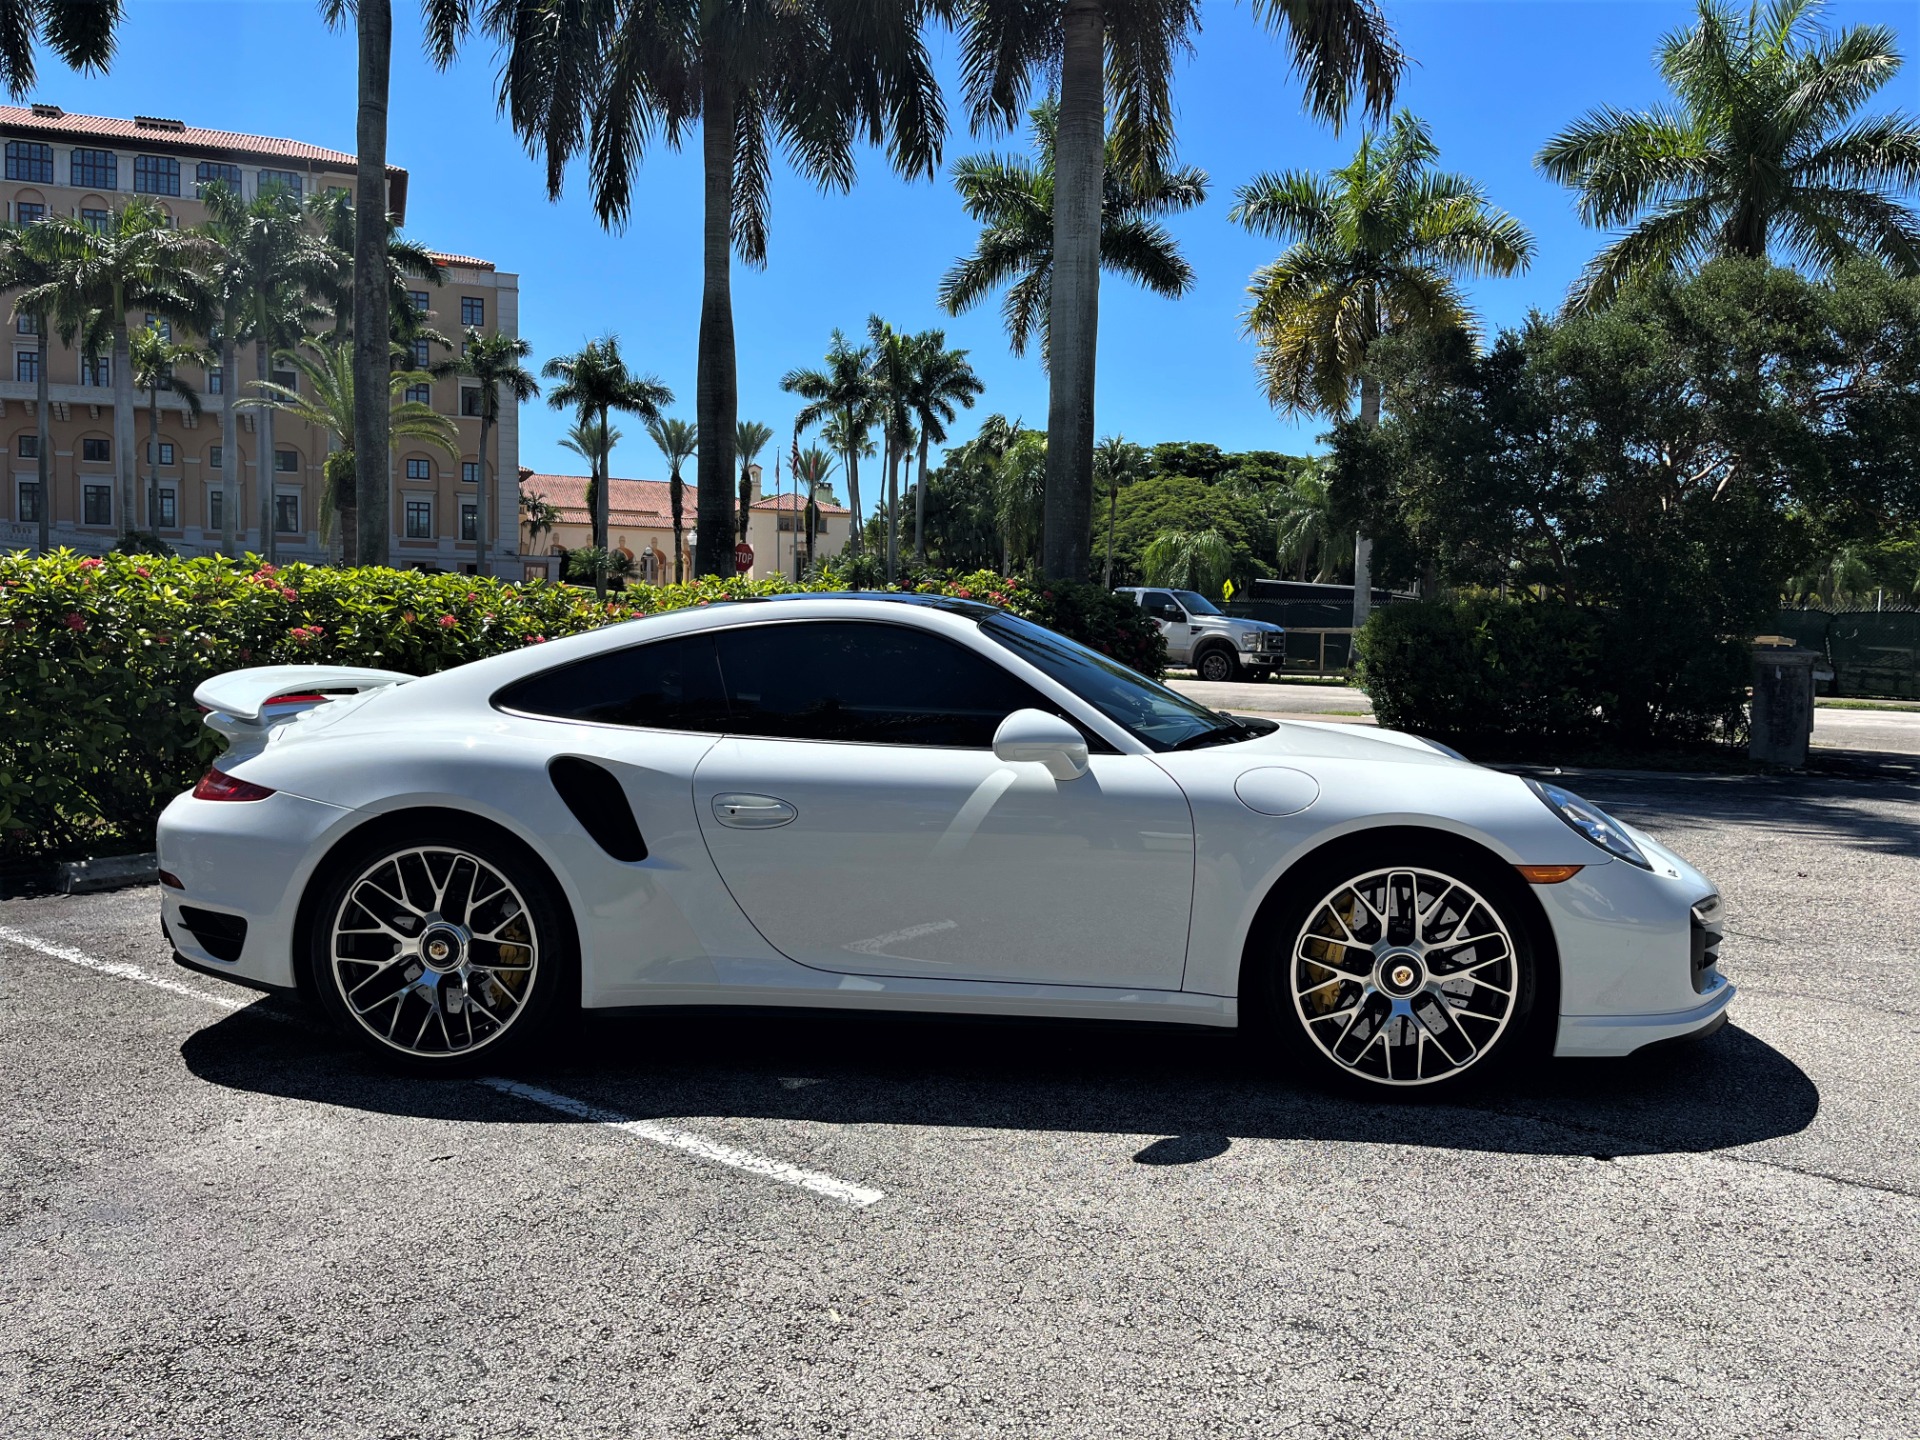 Used 2014 Porsche 911 Turbo S for sale $125,850 at The Gables Sports Cars in Miami FL 33146 3